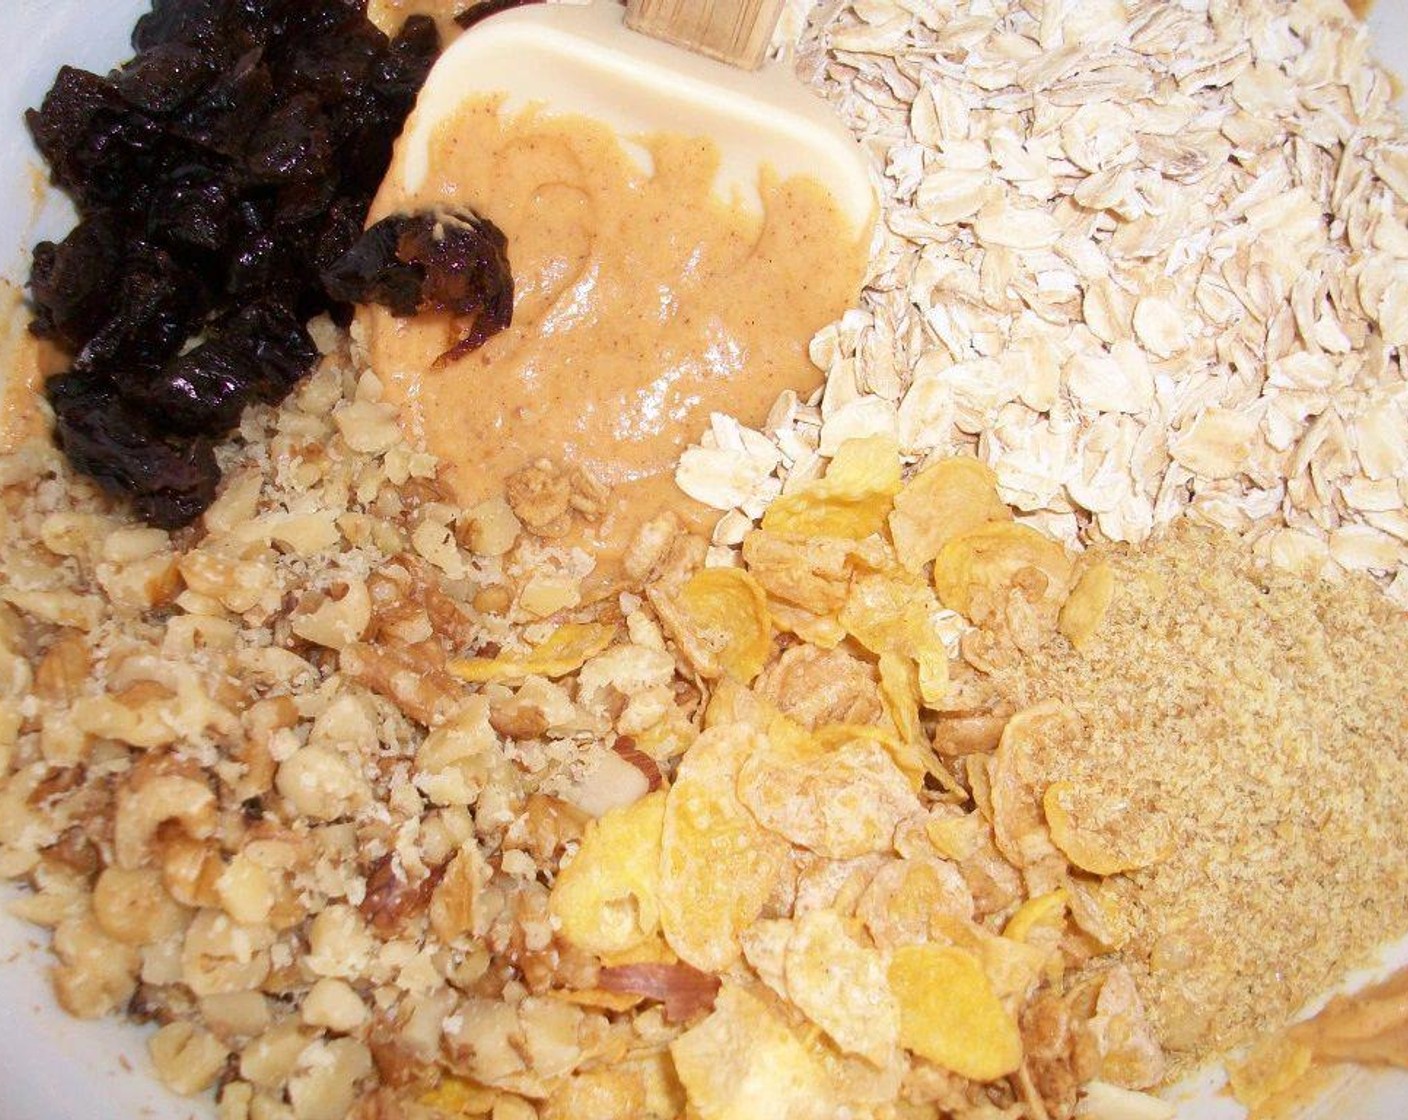 step 4 After combined, mix in the dry ingredients, then add Oats (1/2 cup), Honey Bunches of Oats® Honey Roasted (1/2 cup), Raisins (1/3 cup), Walnut (1/3 cup), and Flaxseeds (1 Tbsp).